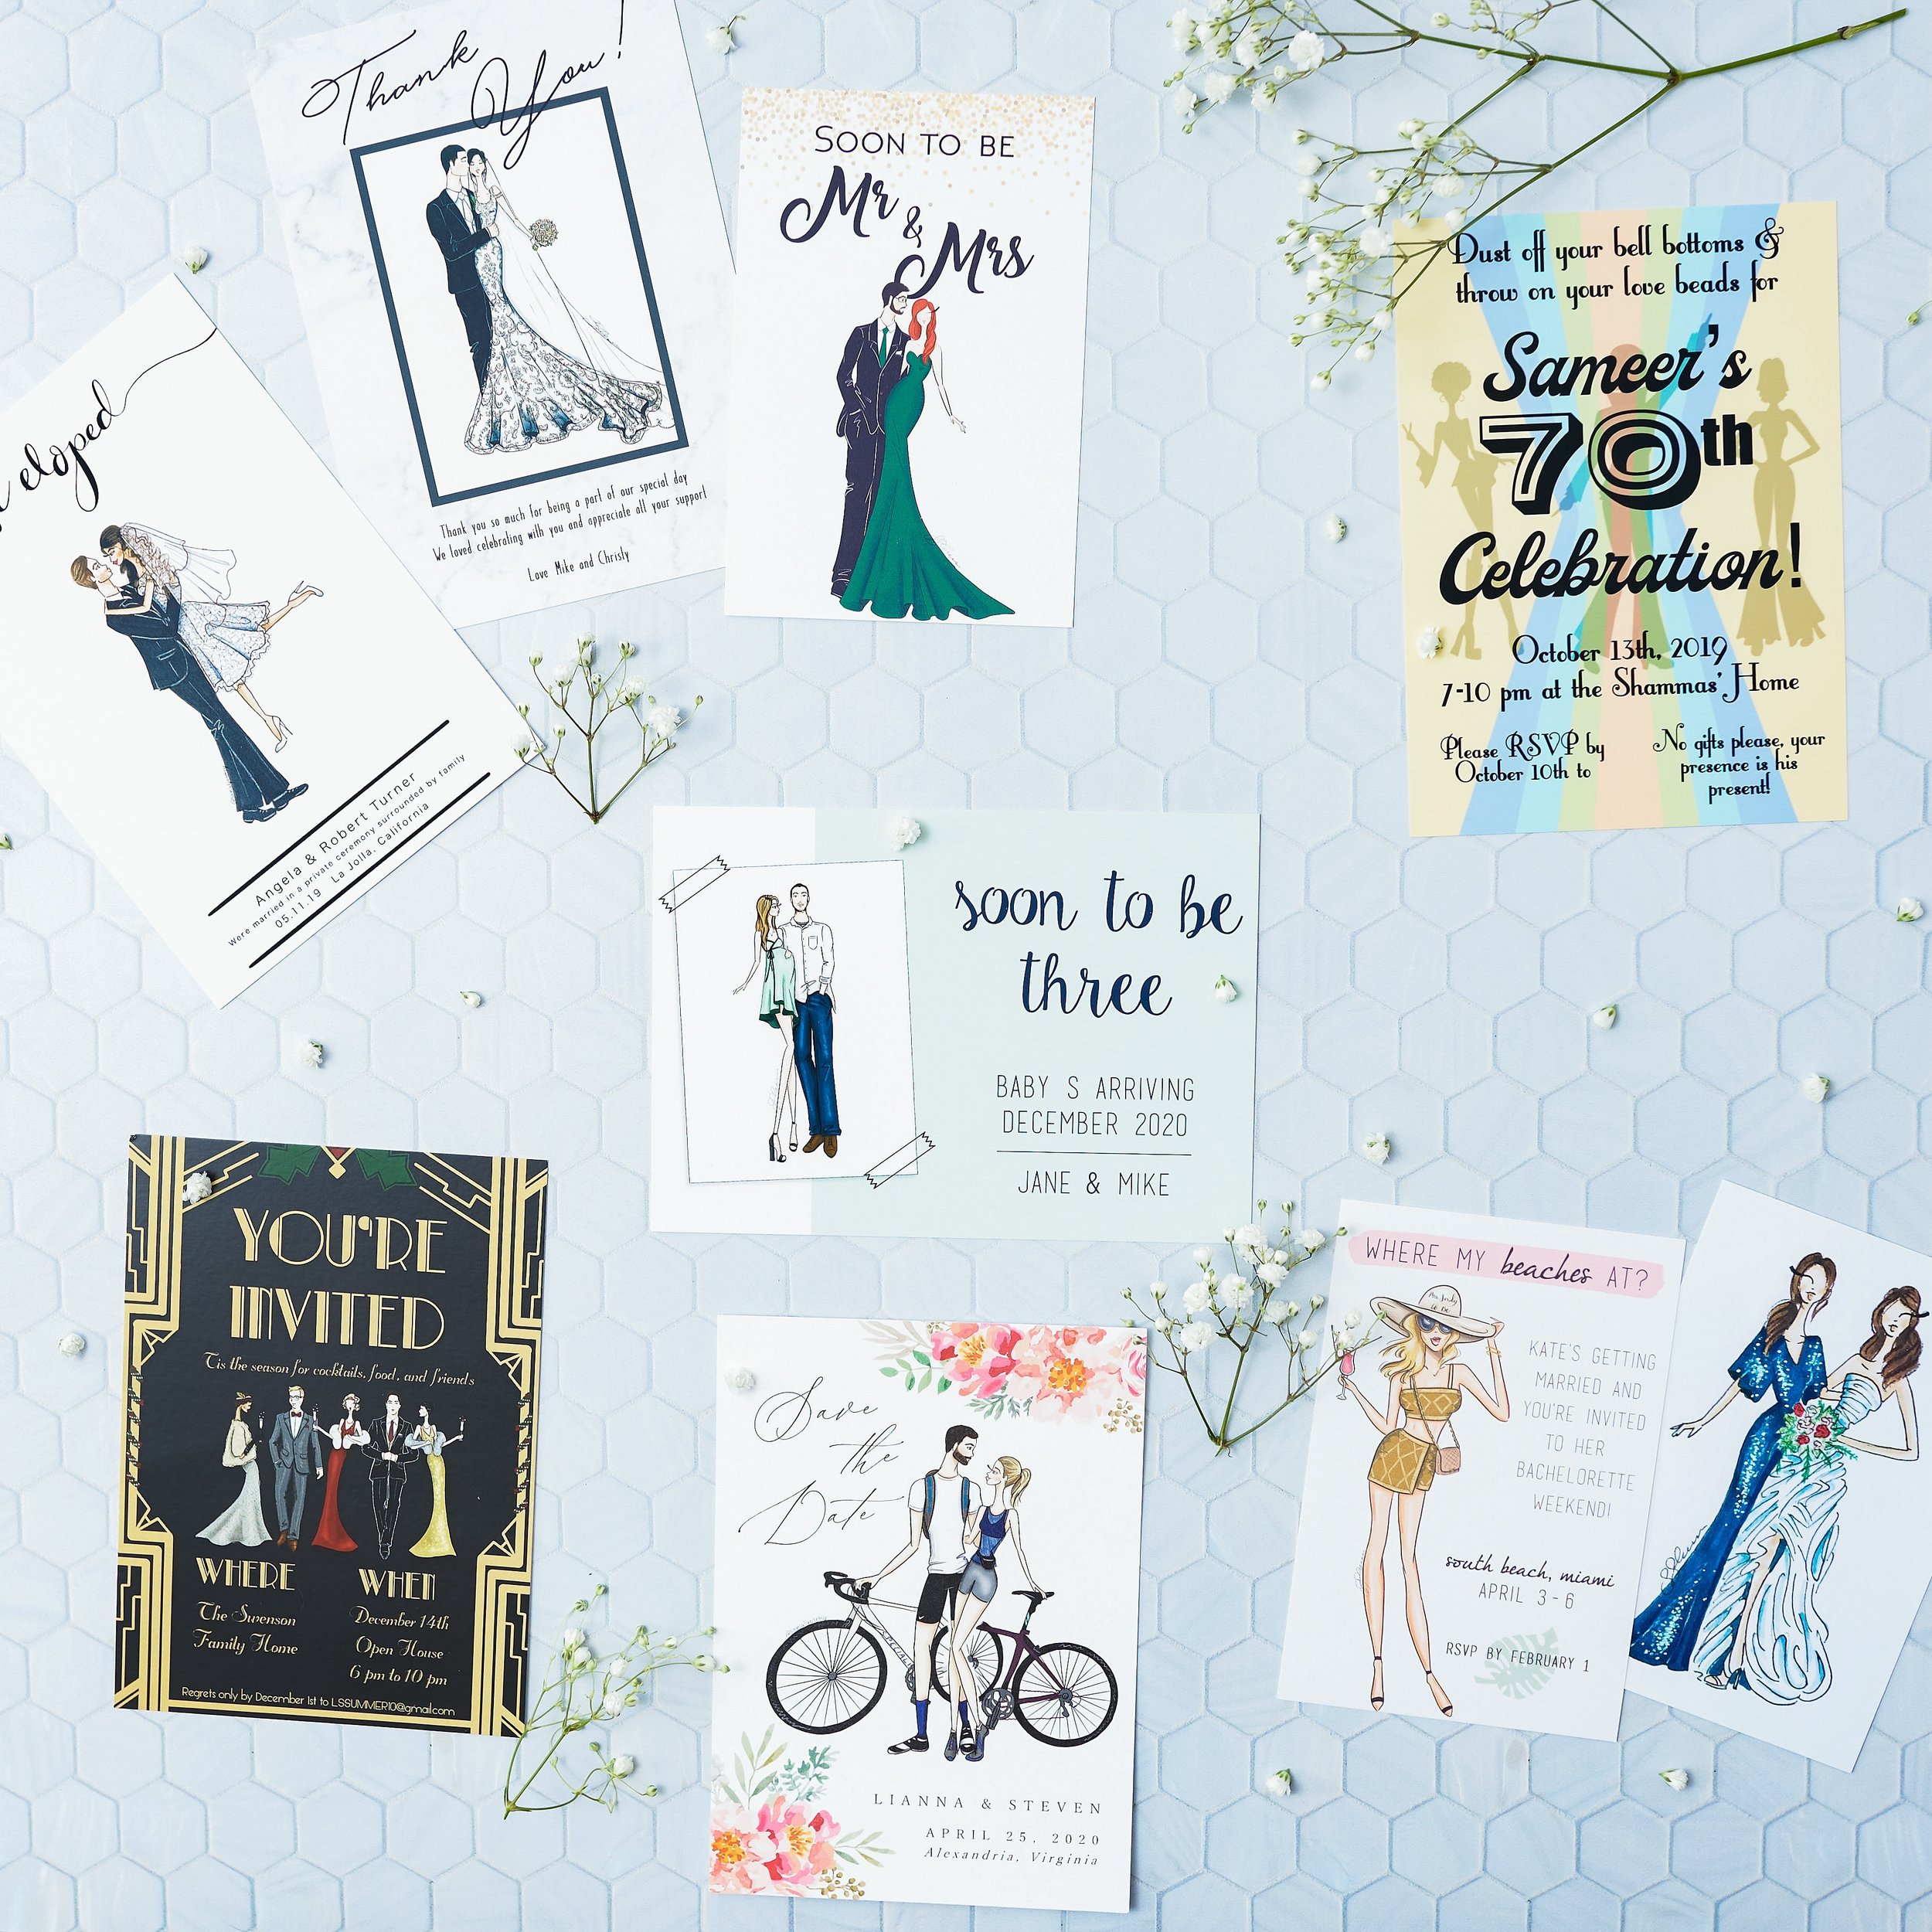 YOU&rsquo;RE INVITED 💌

Wouldn&rsquo;t it be exciting to receive a card or invite with an illustration of your company&rsquo;s products or maybe one of your favorite couples for their save the date? 

From custom invitations to personalized menus an